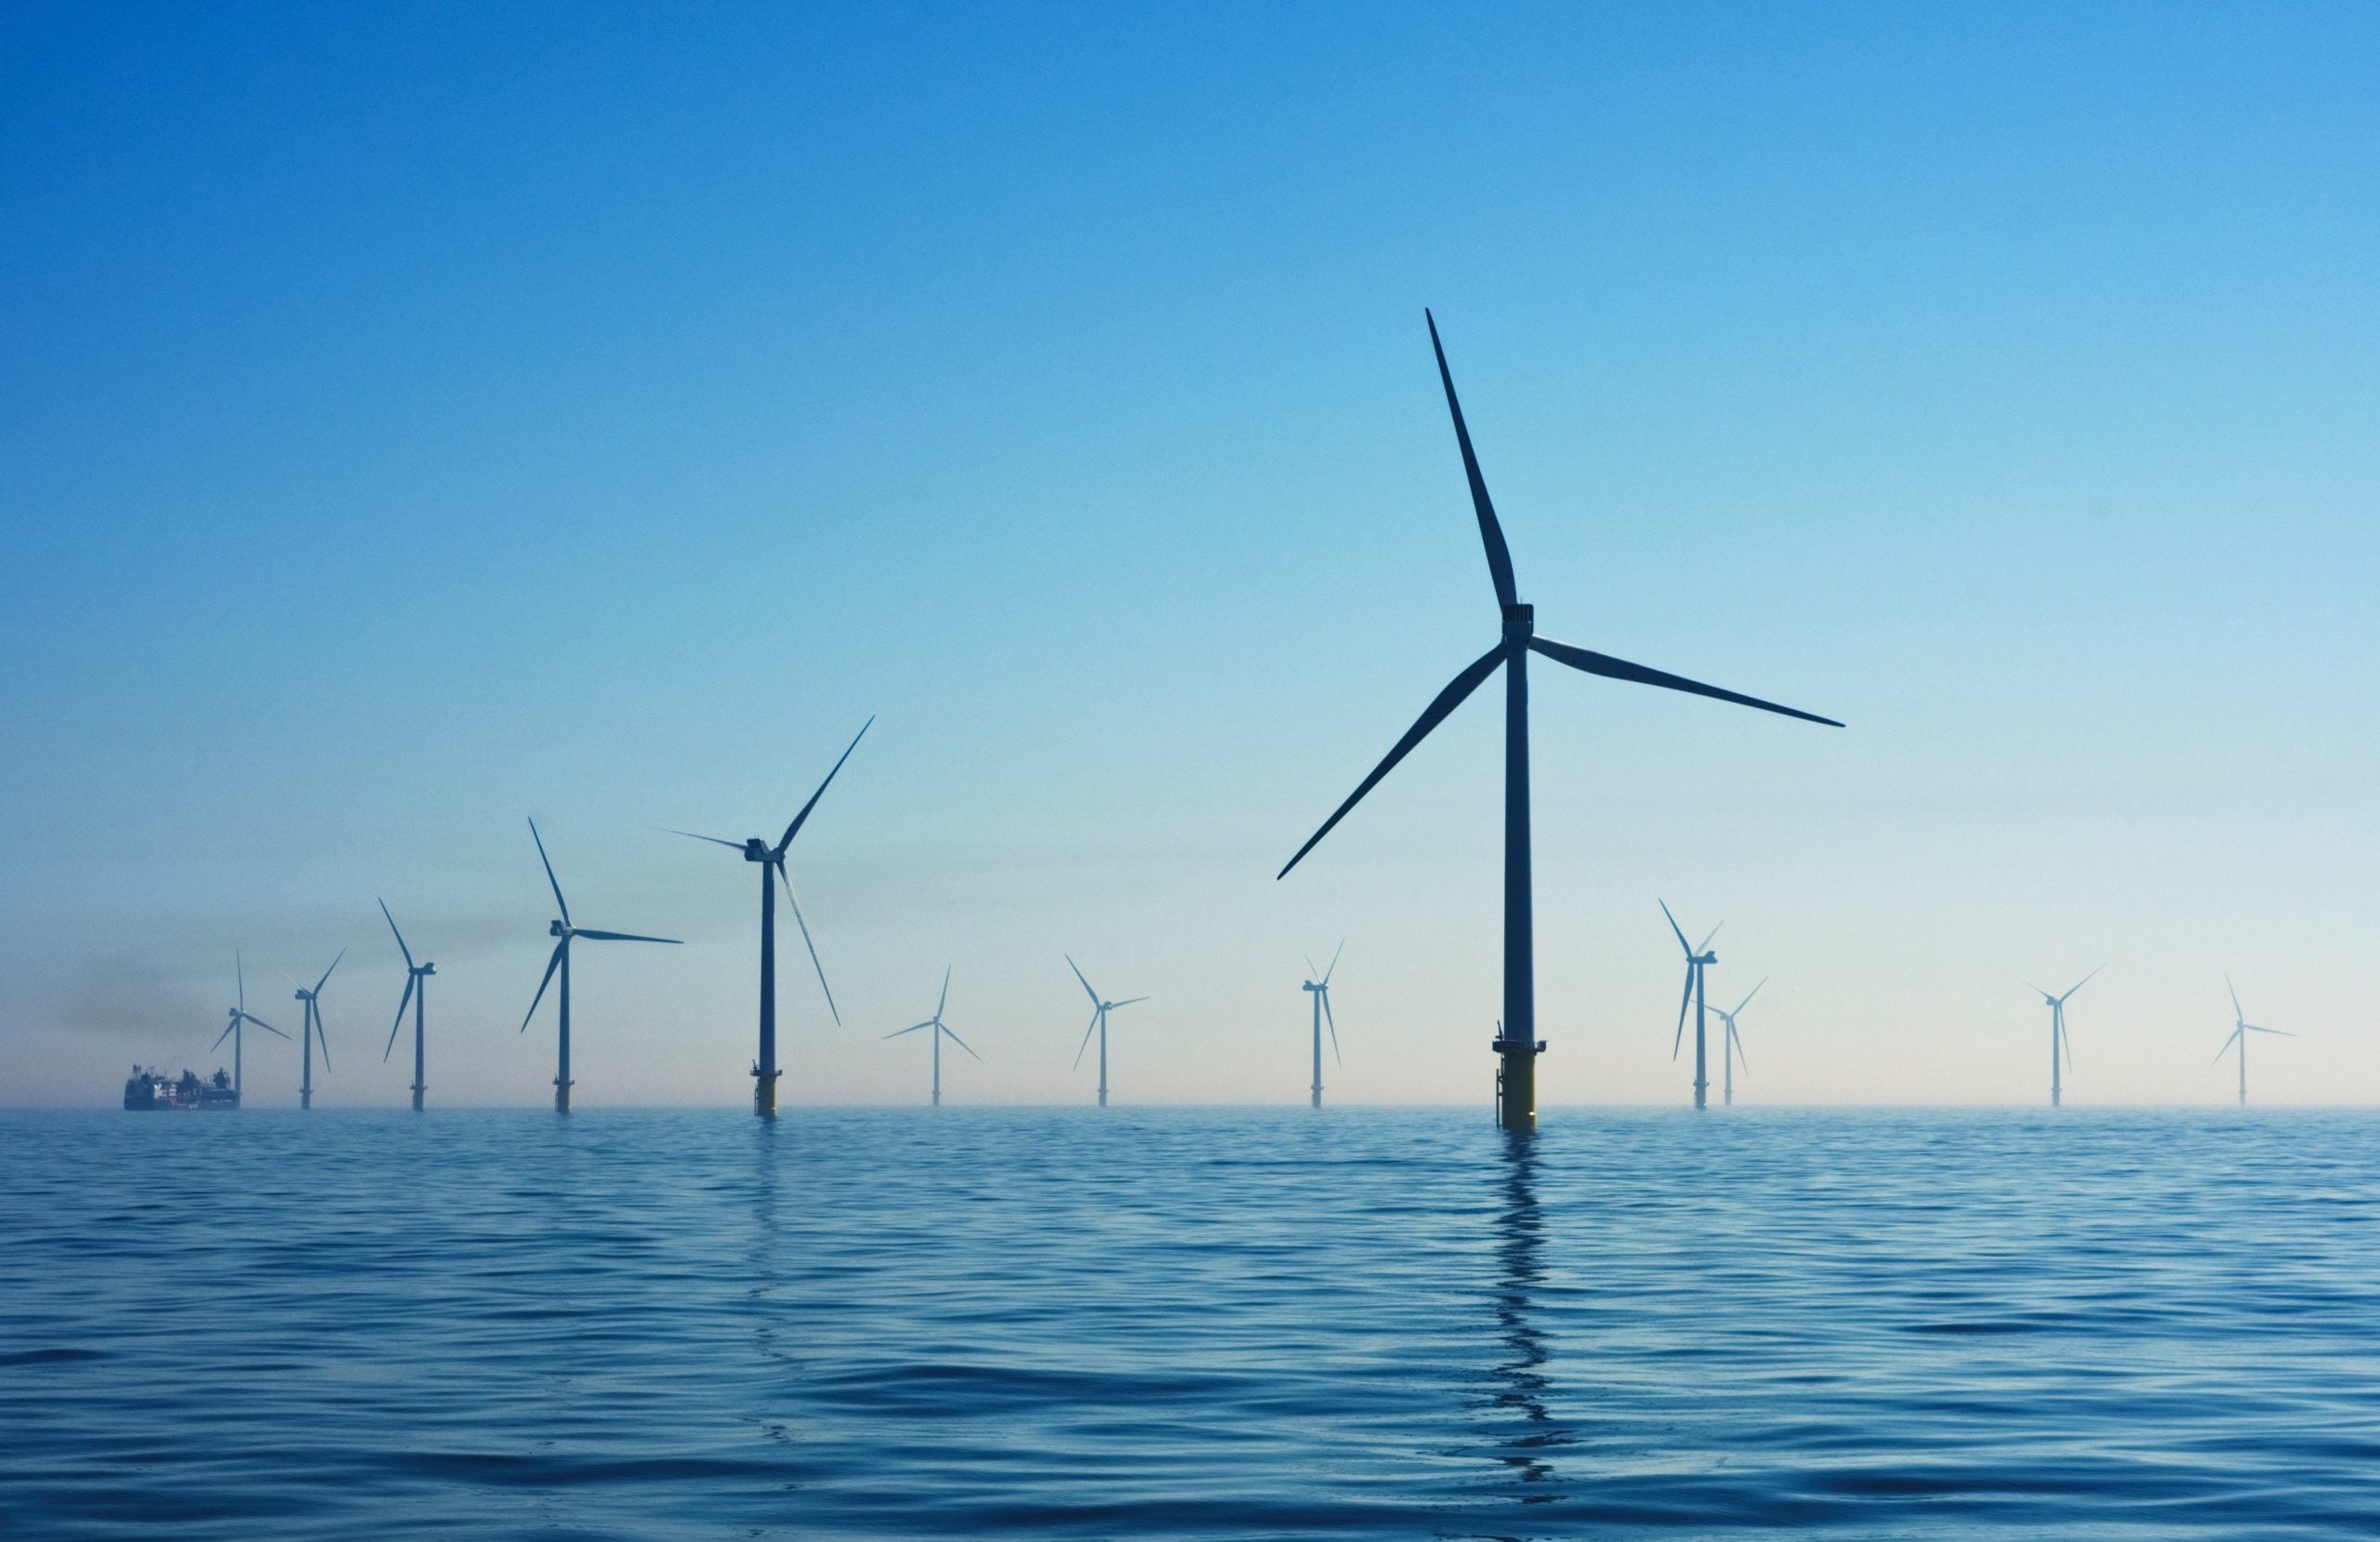 Turbine Wind Farm Out At Sea By Nick Page, Wind Farm In Ocean